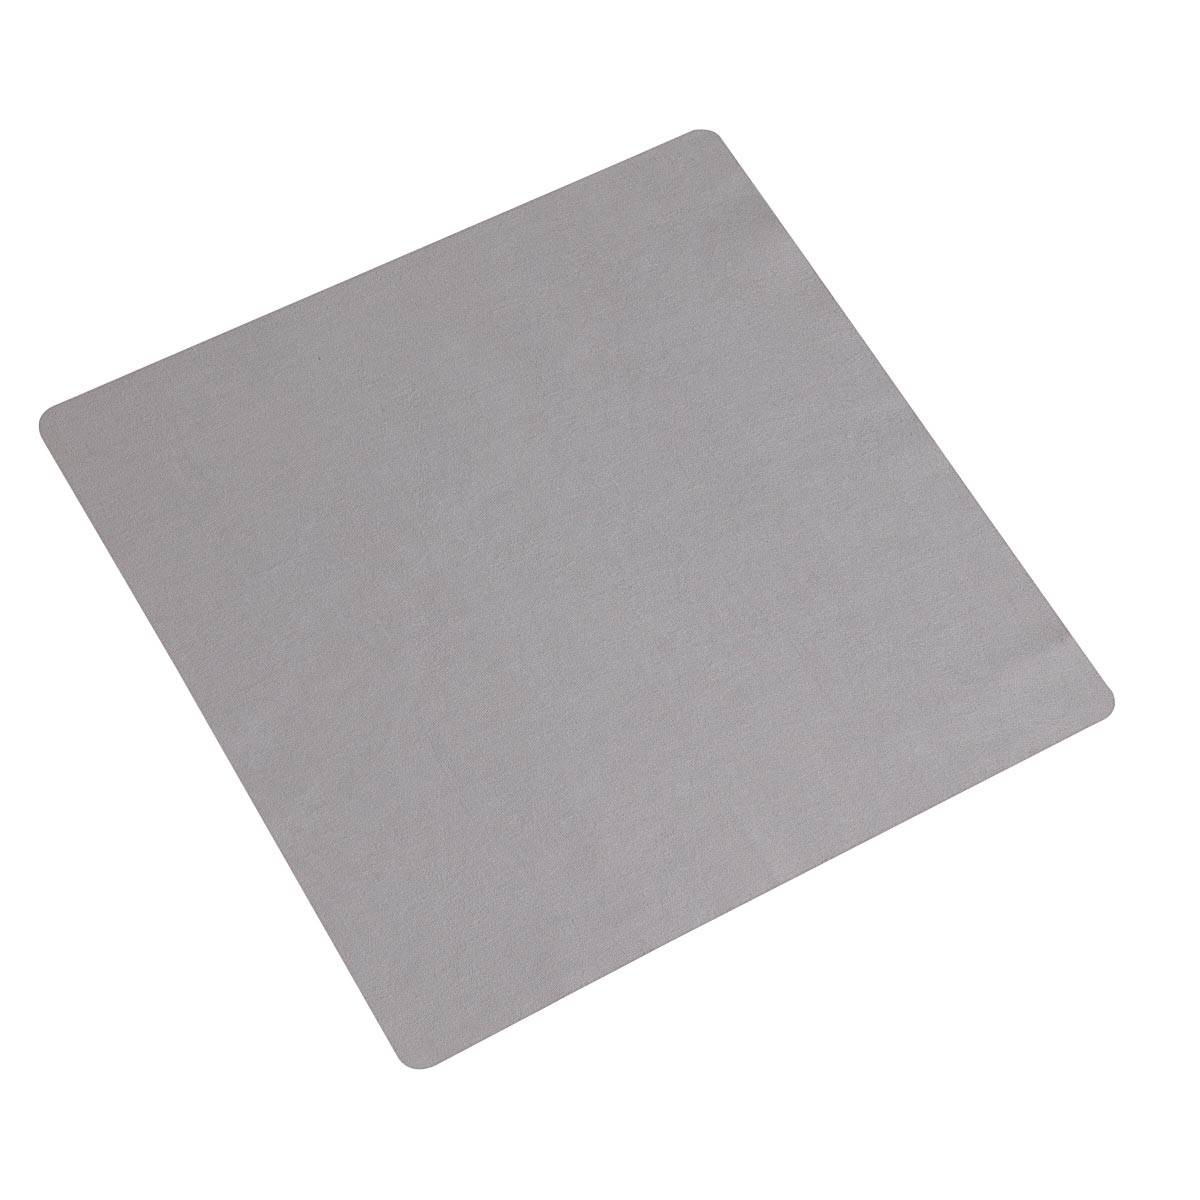 SOUNDSATION UL-3030 Microfiber Cleaning Cloth